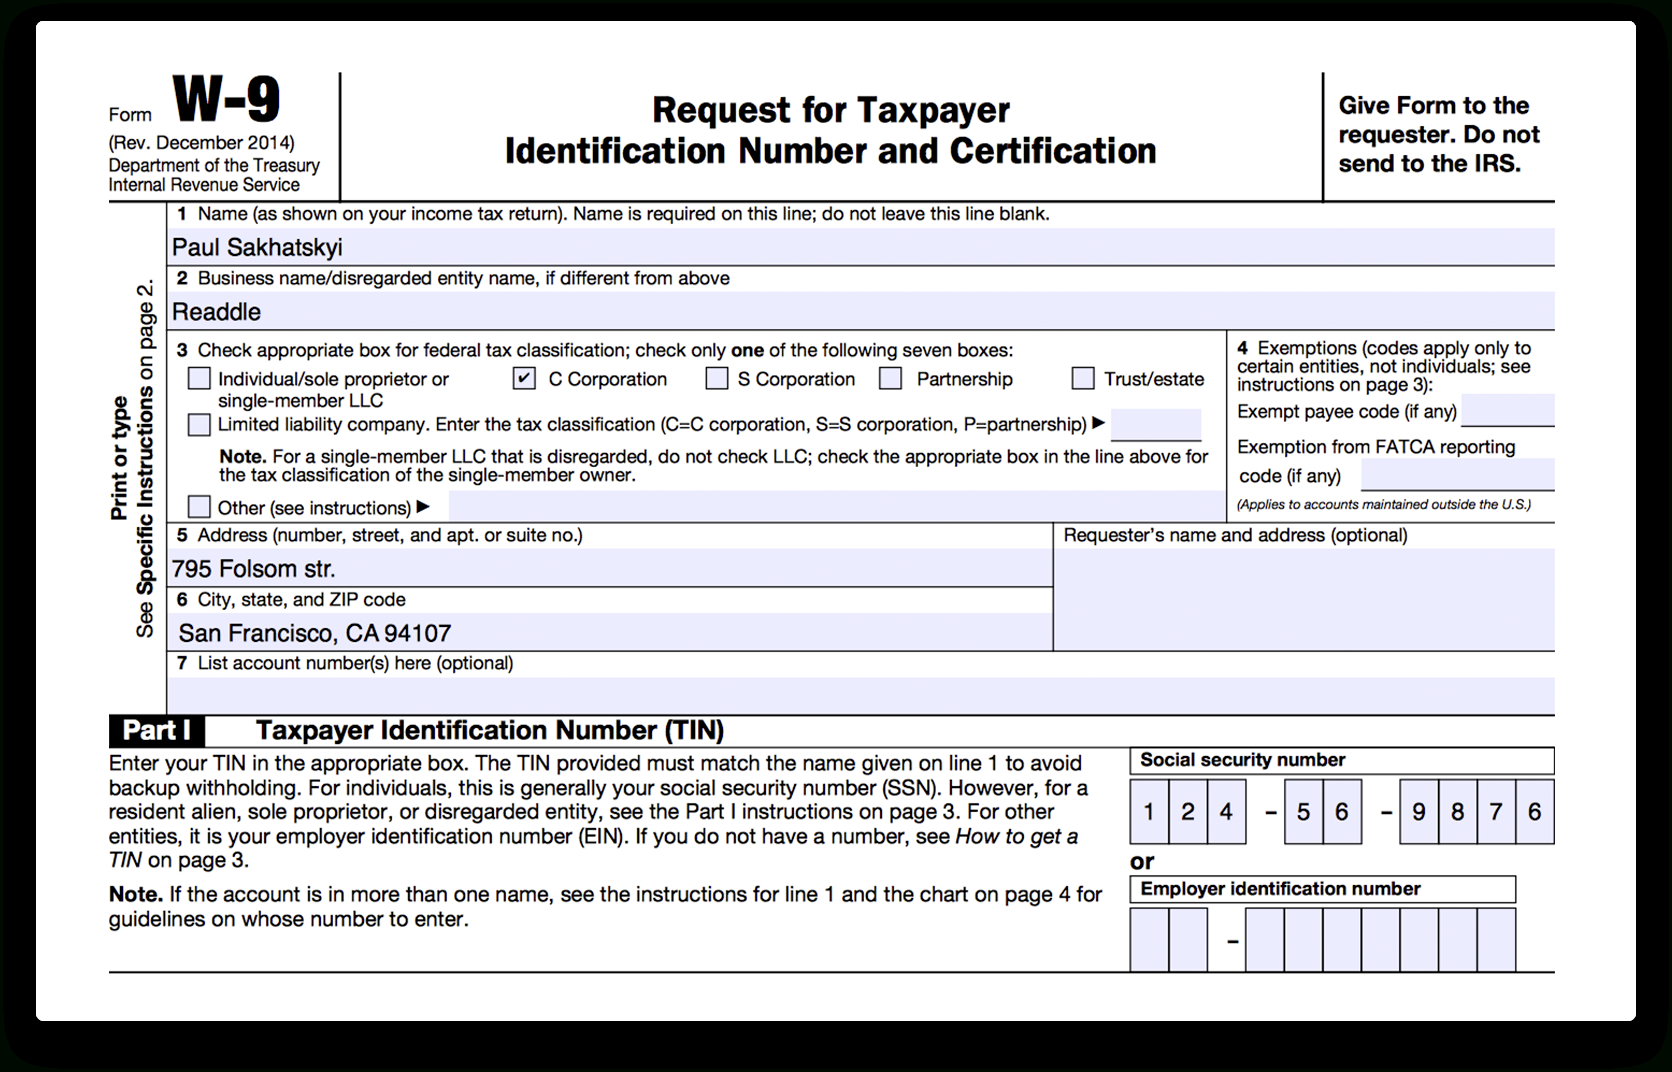 How To Fill Out Irs Form W-9 2017-2018 | Pdf Expert-Printable Blank W 9 Forms Pdf 2021